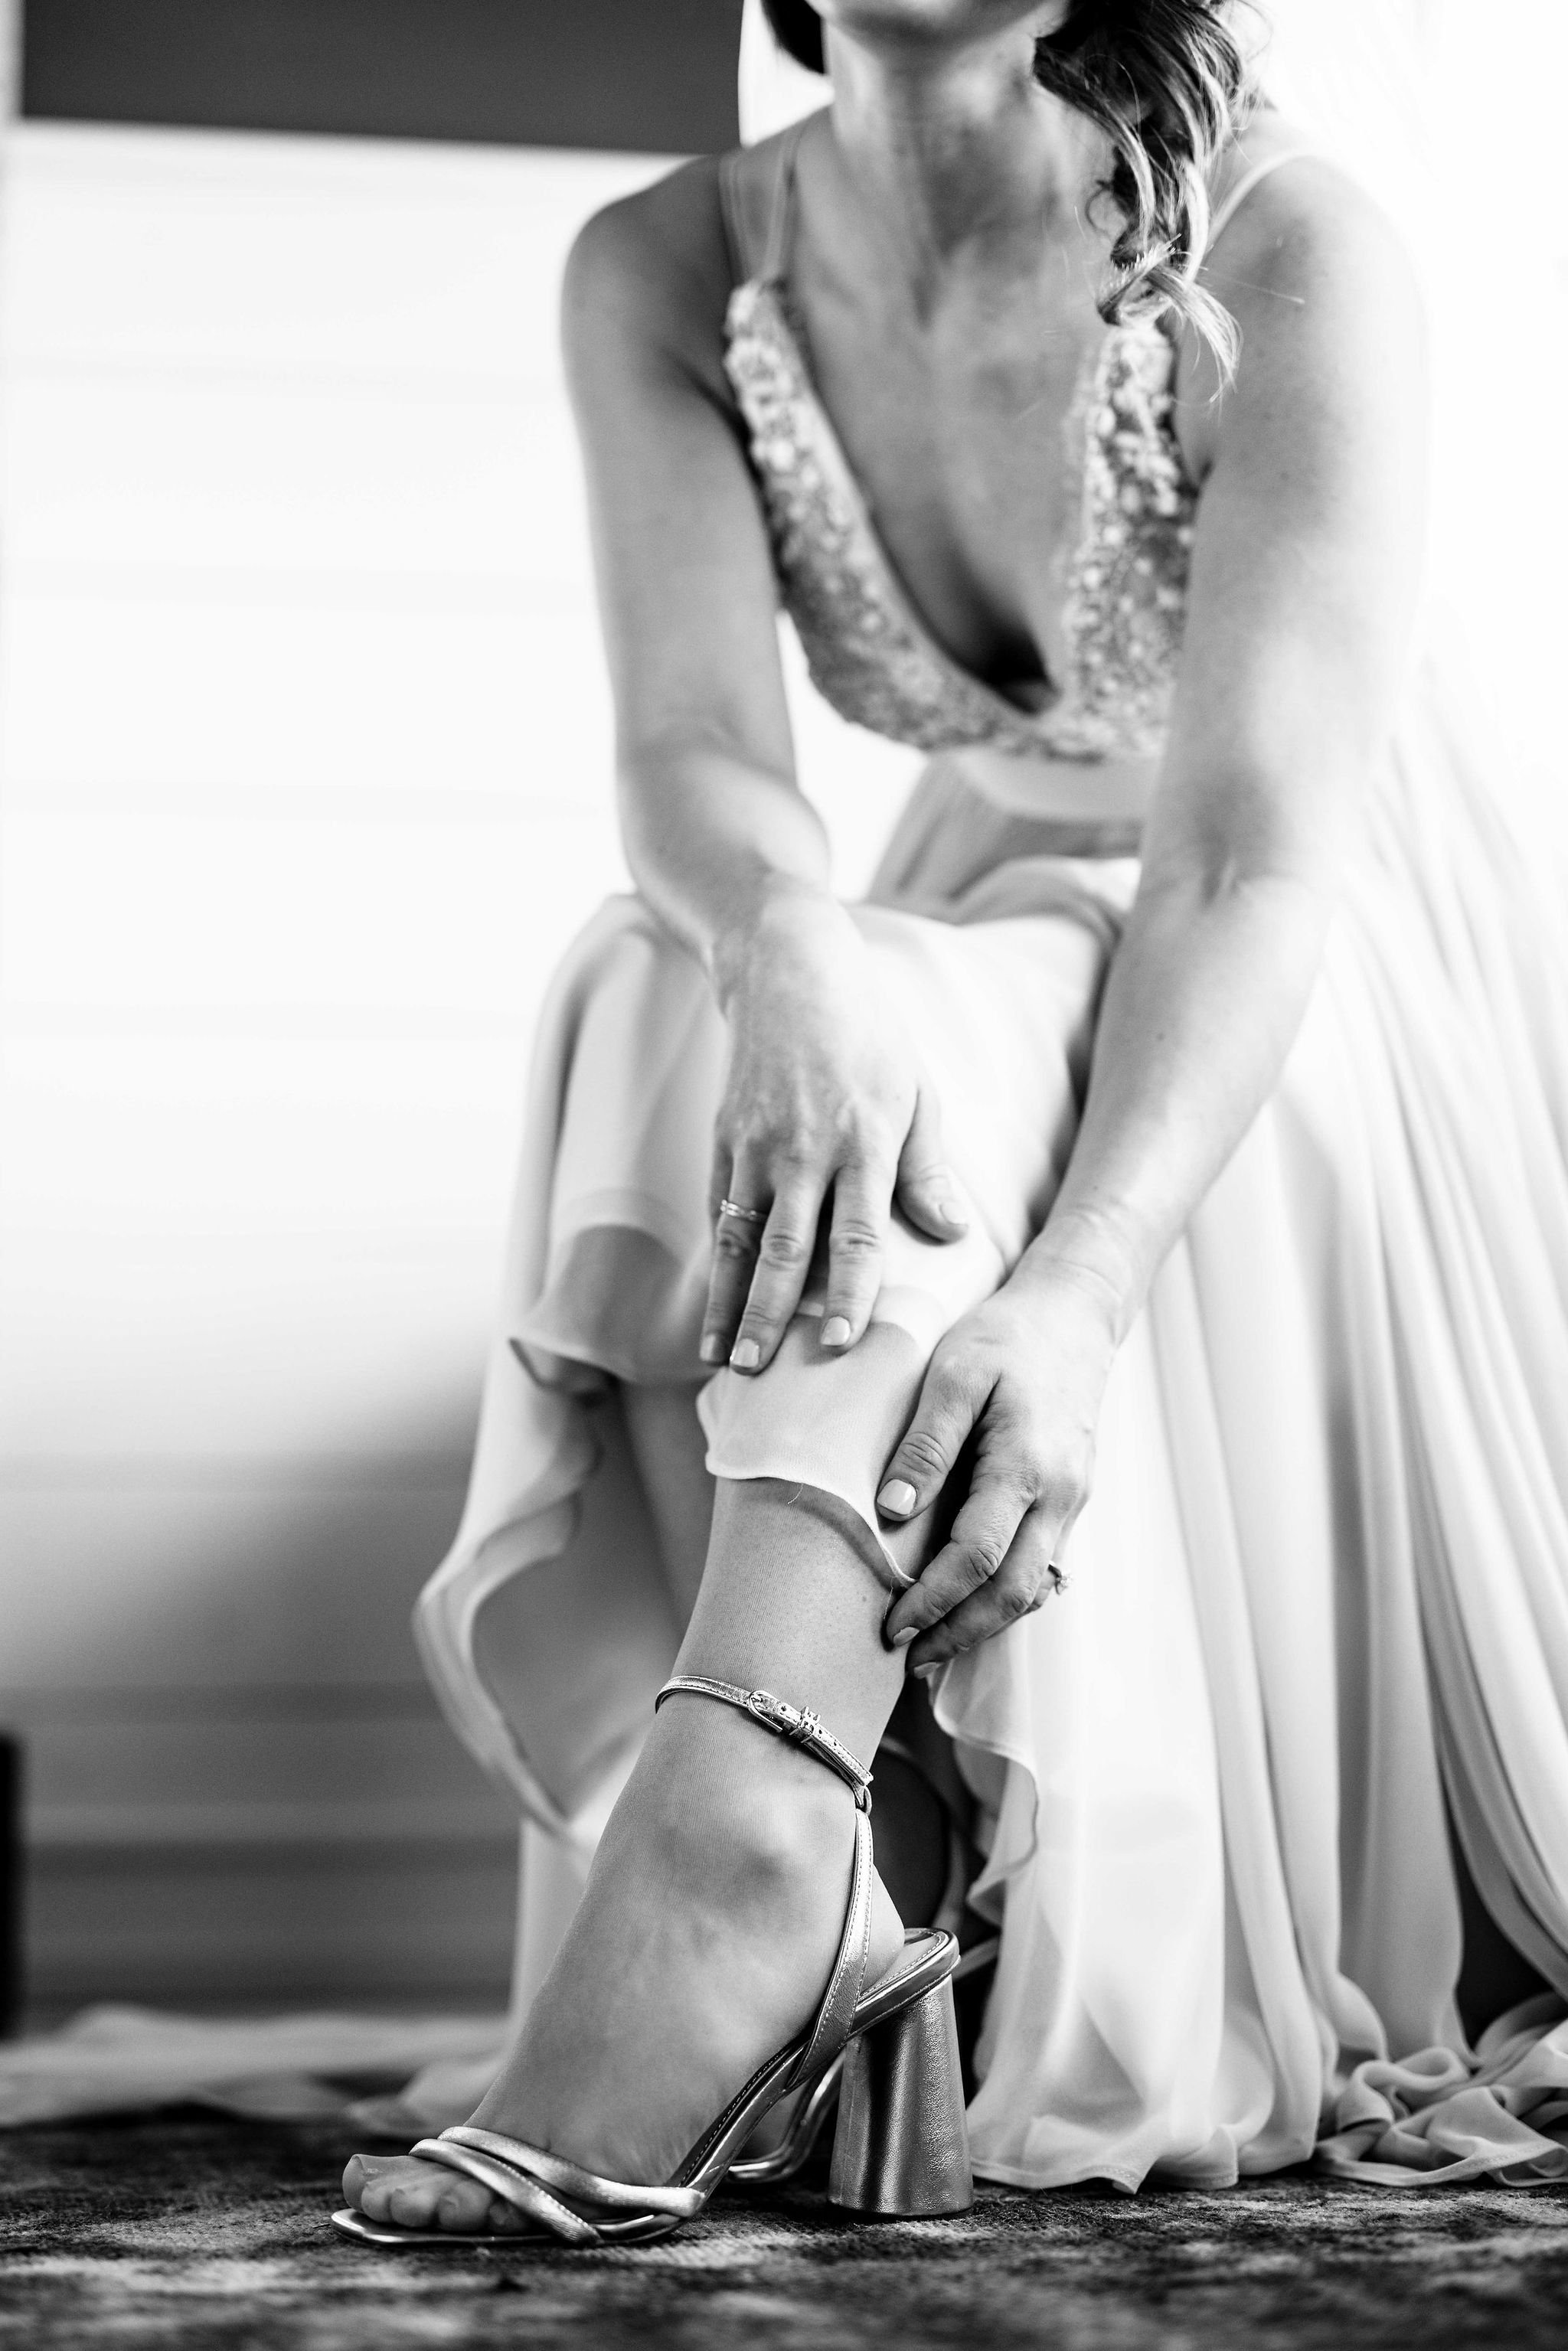 Bride - putting on shoes - getting ready.jpg